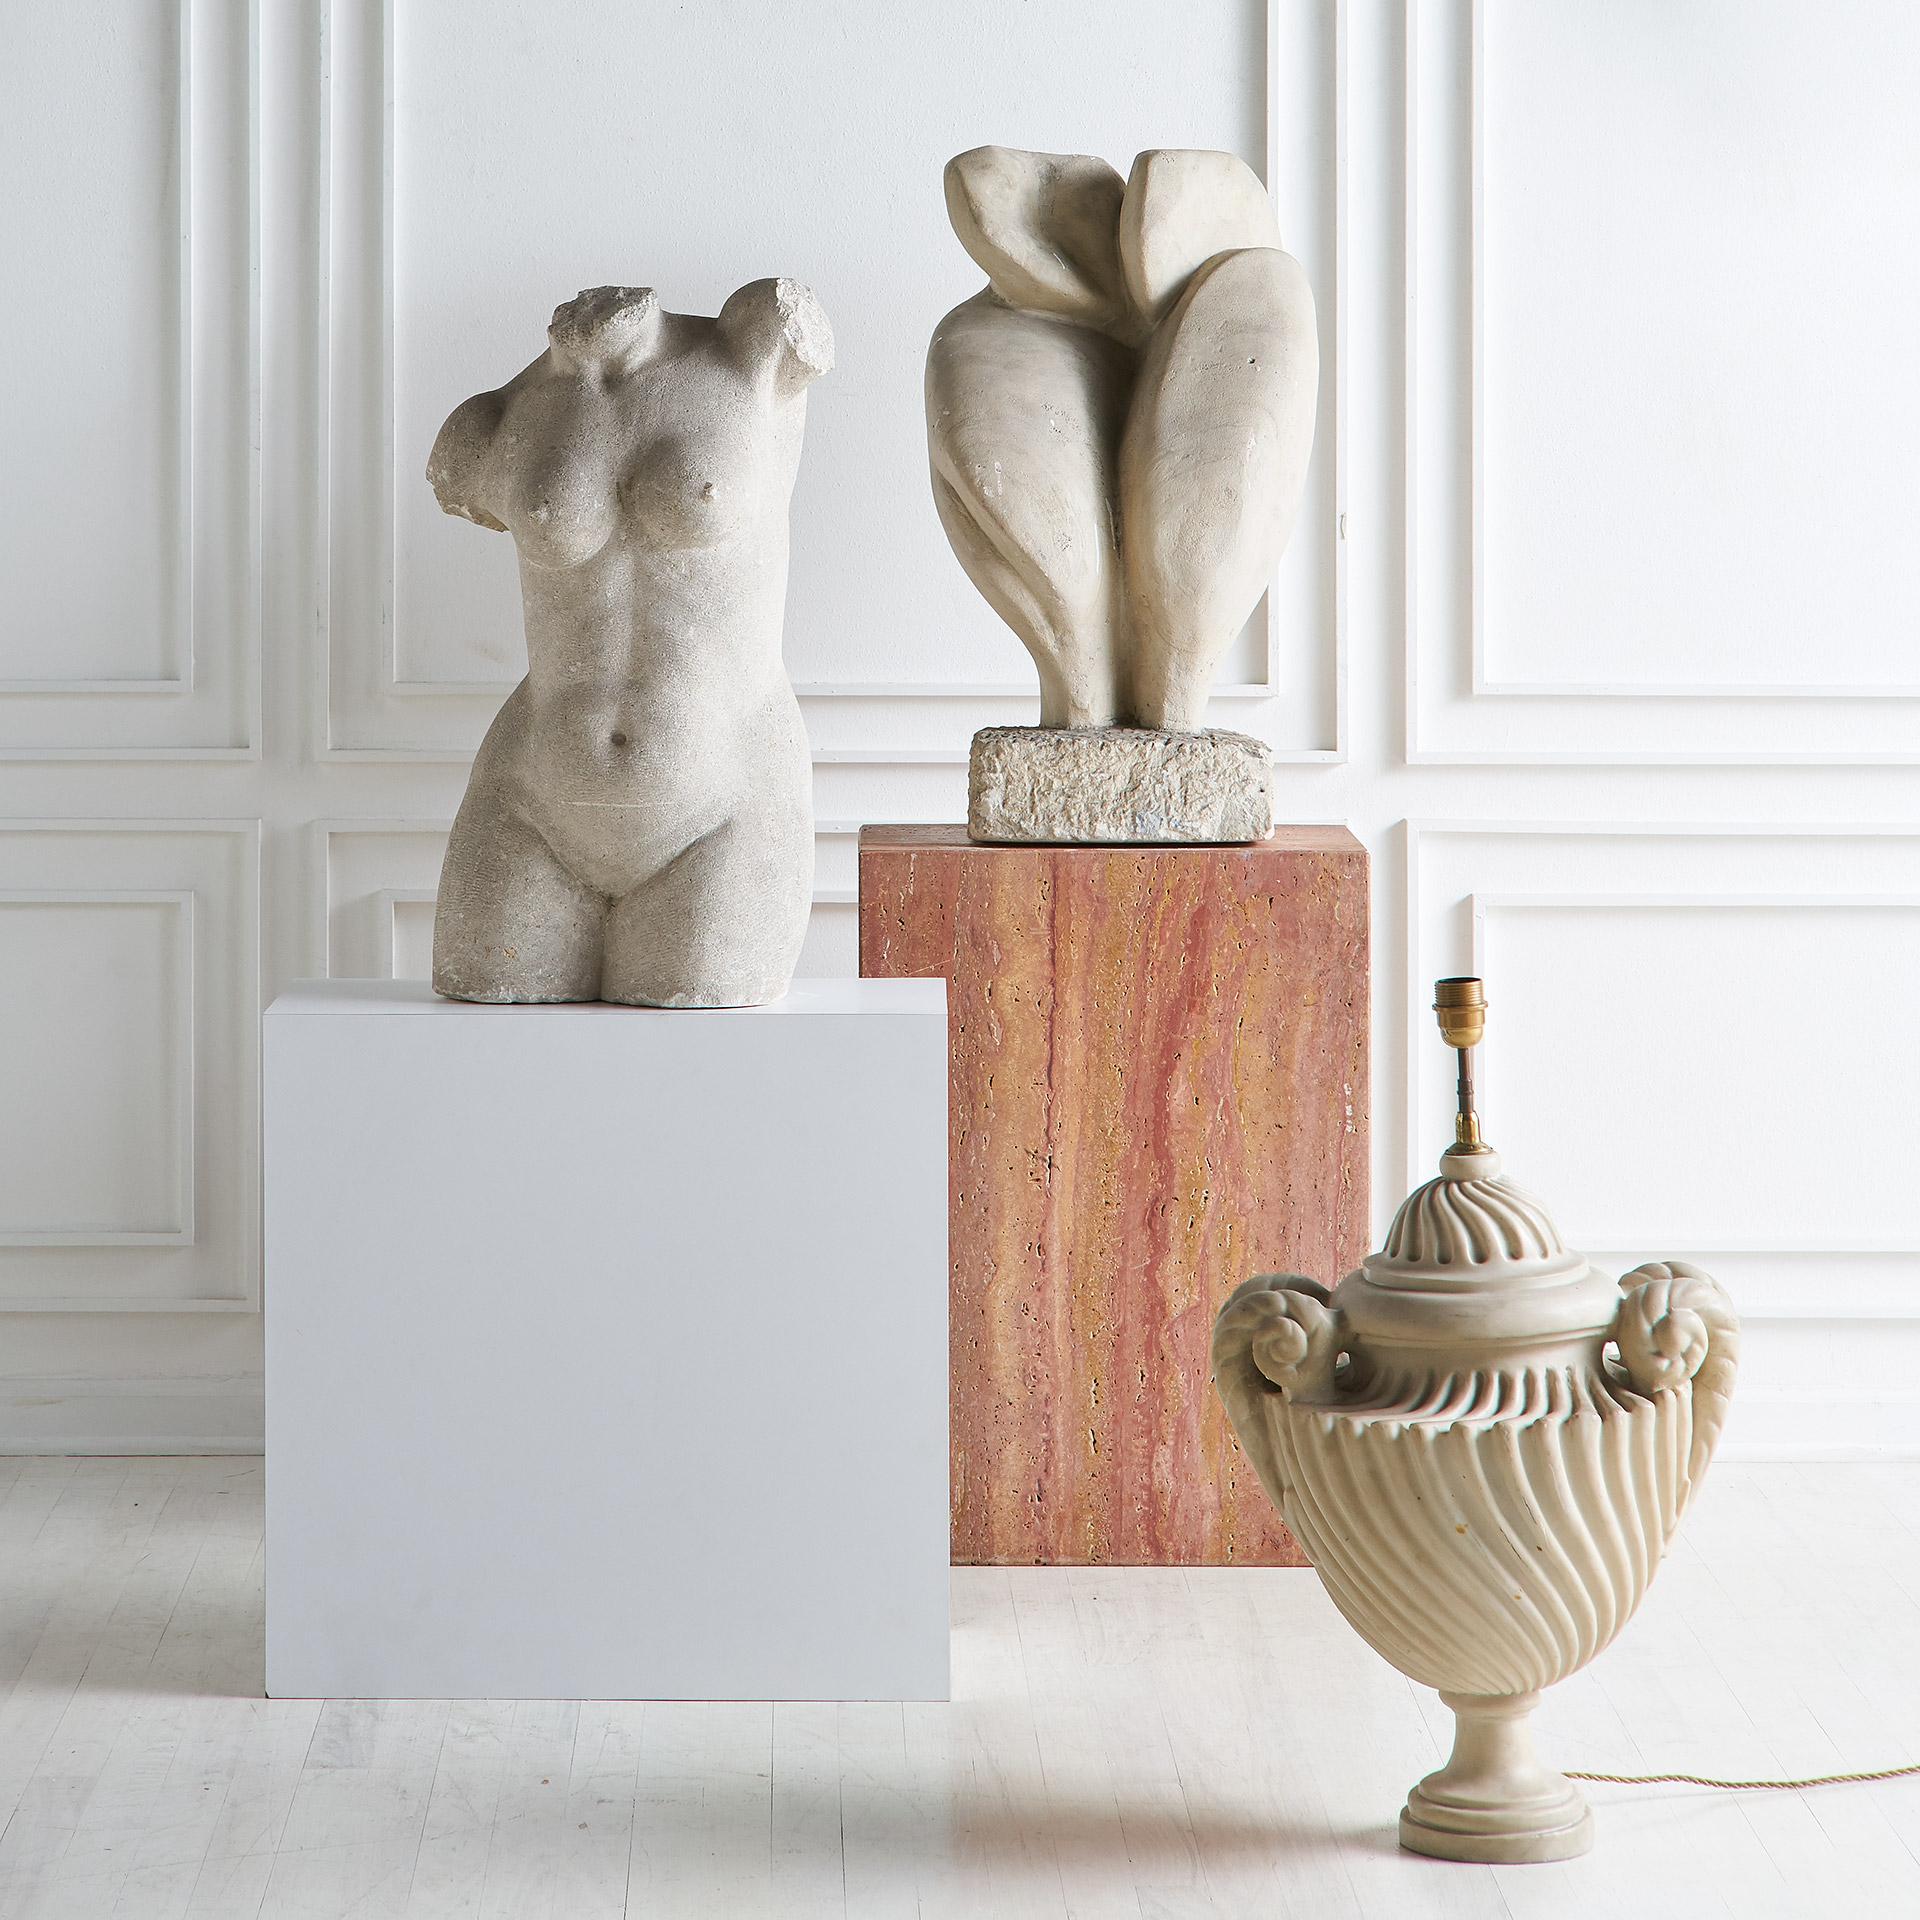 A 20th century abstract figural sculpture in stone. Beautiful, graceful shapes and a large scale create a poignant piece. Artist Unknown. Sourced in Europe; circa 1960s.